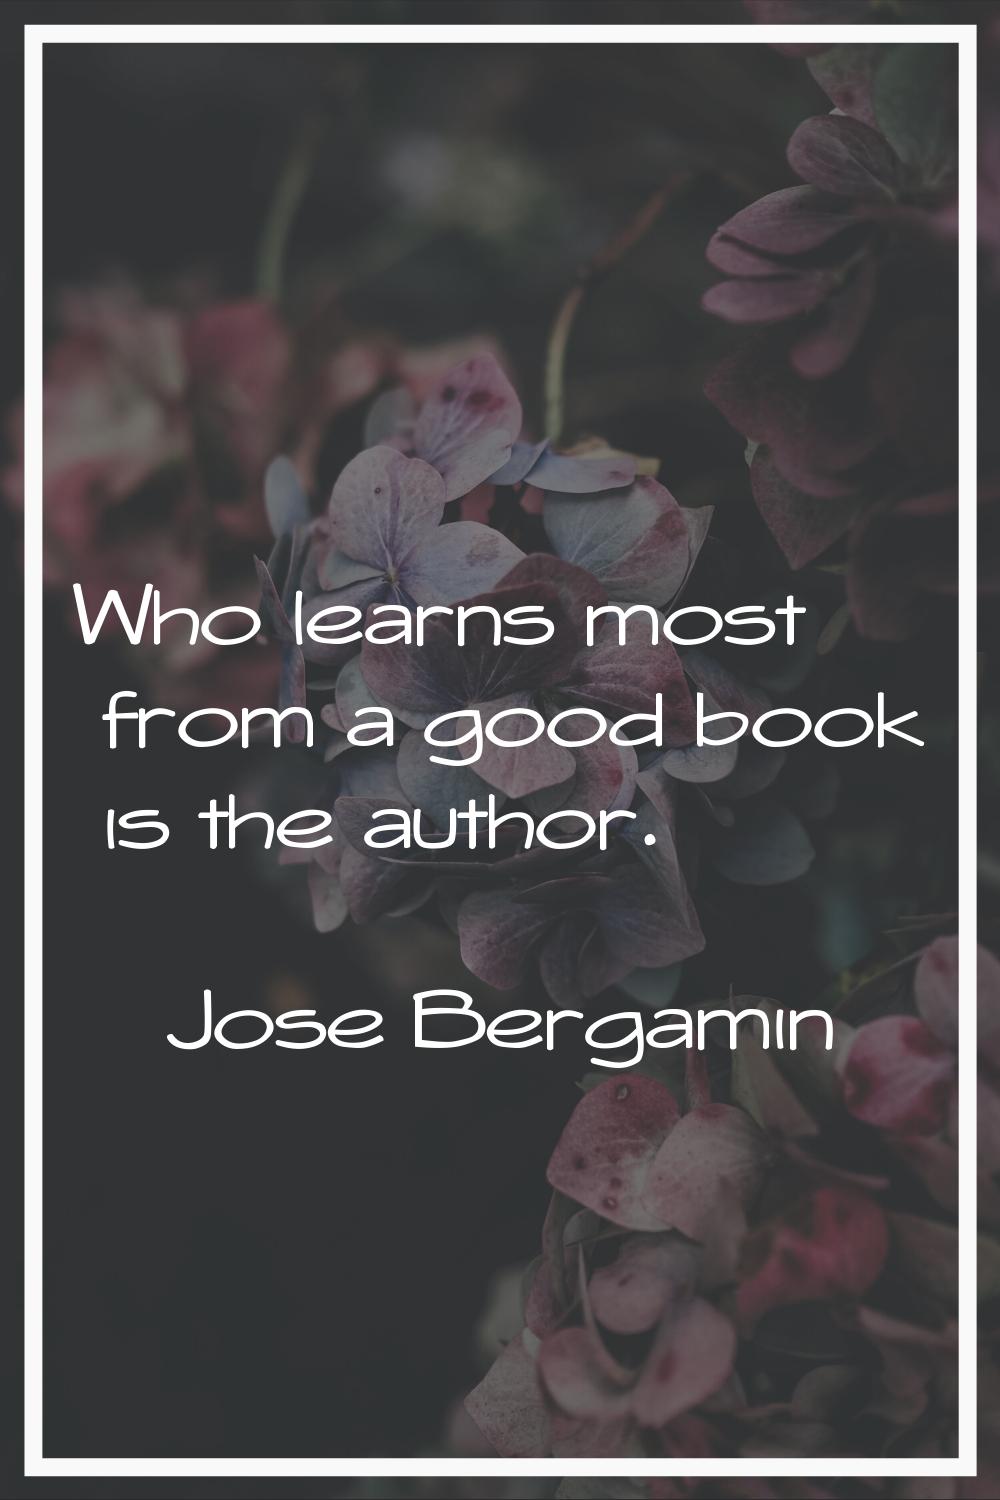 Who learns most from a good book is the author.